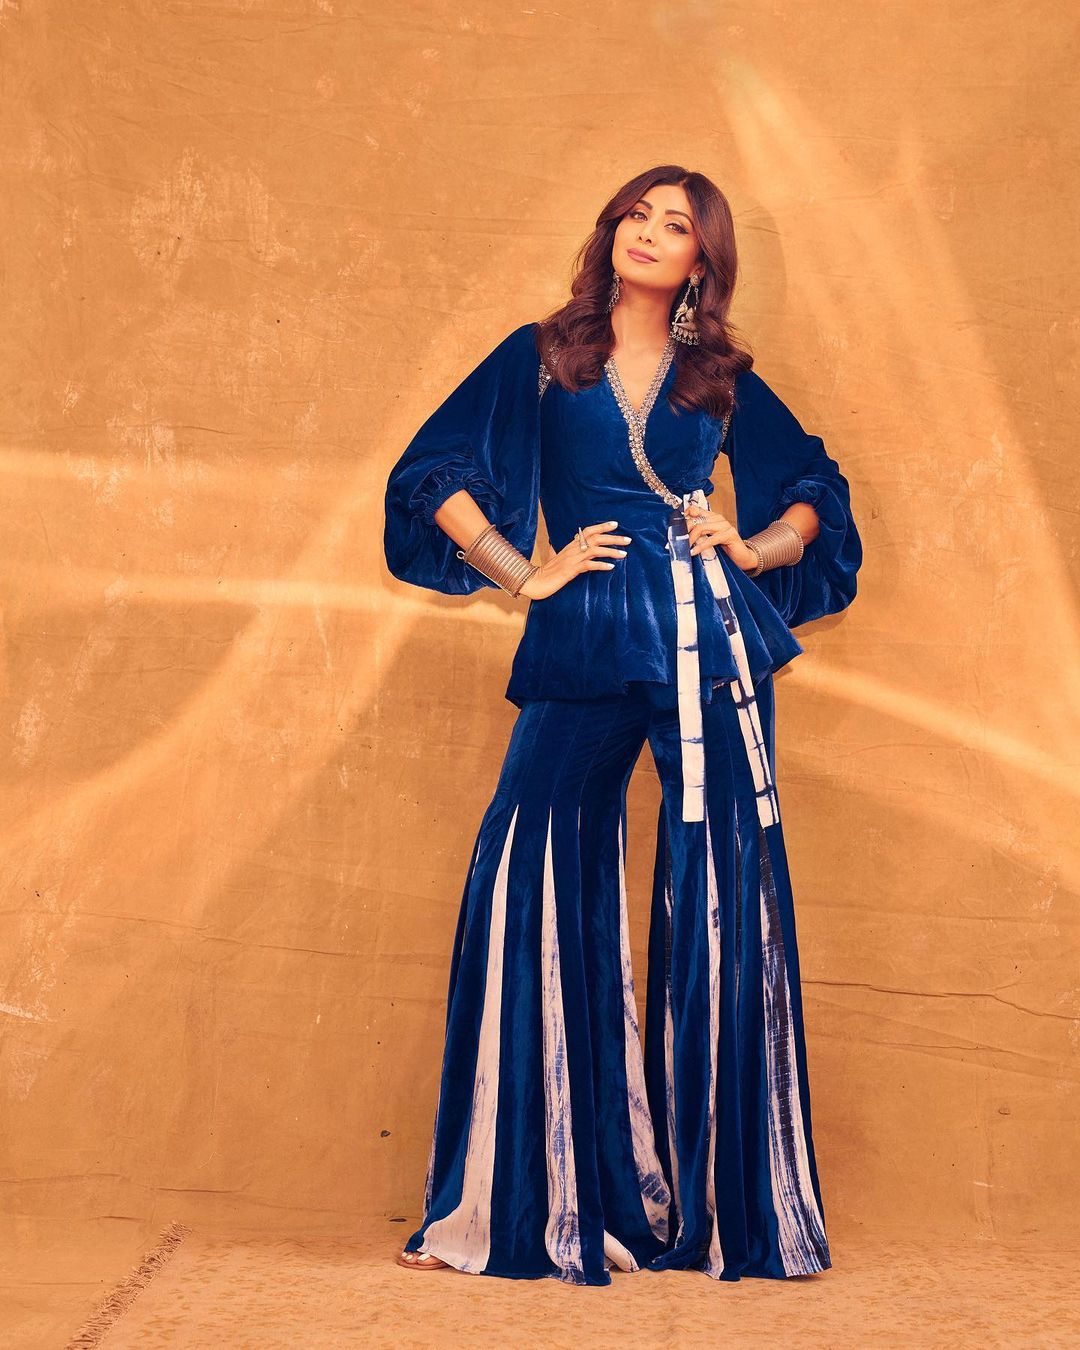  Shilpa Shetty Kundra looks stylish in the wide-legged pants and wrap top. (Image: Instagram)